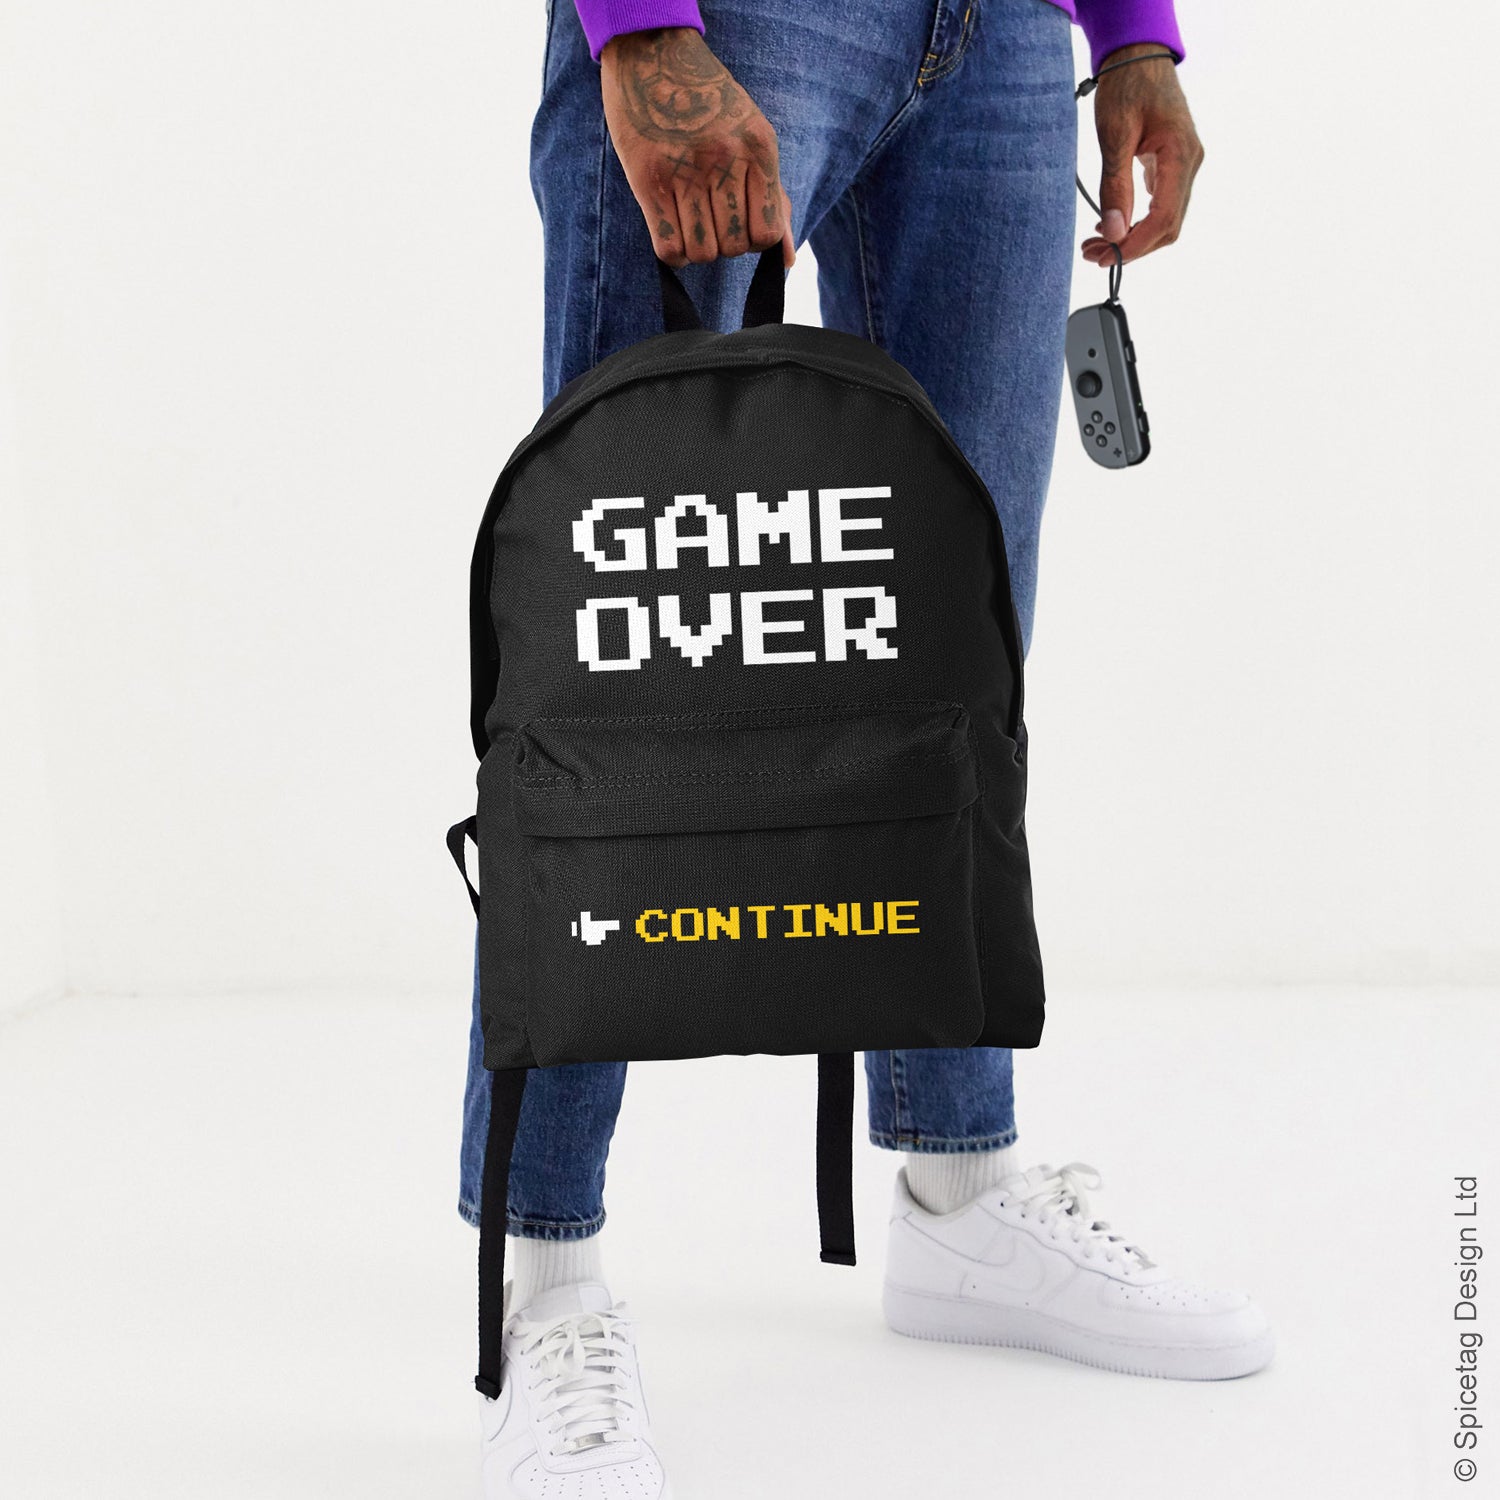 GAME OVER Backpack